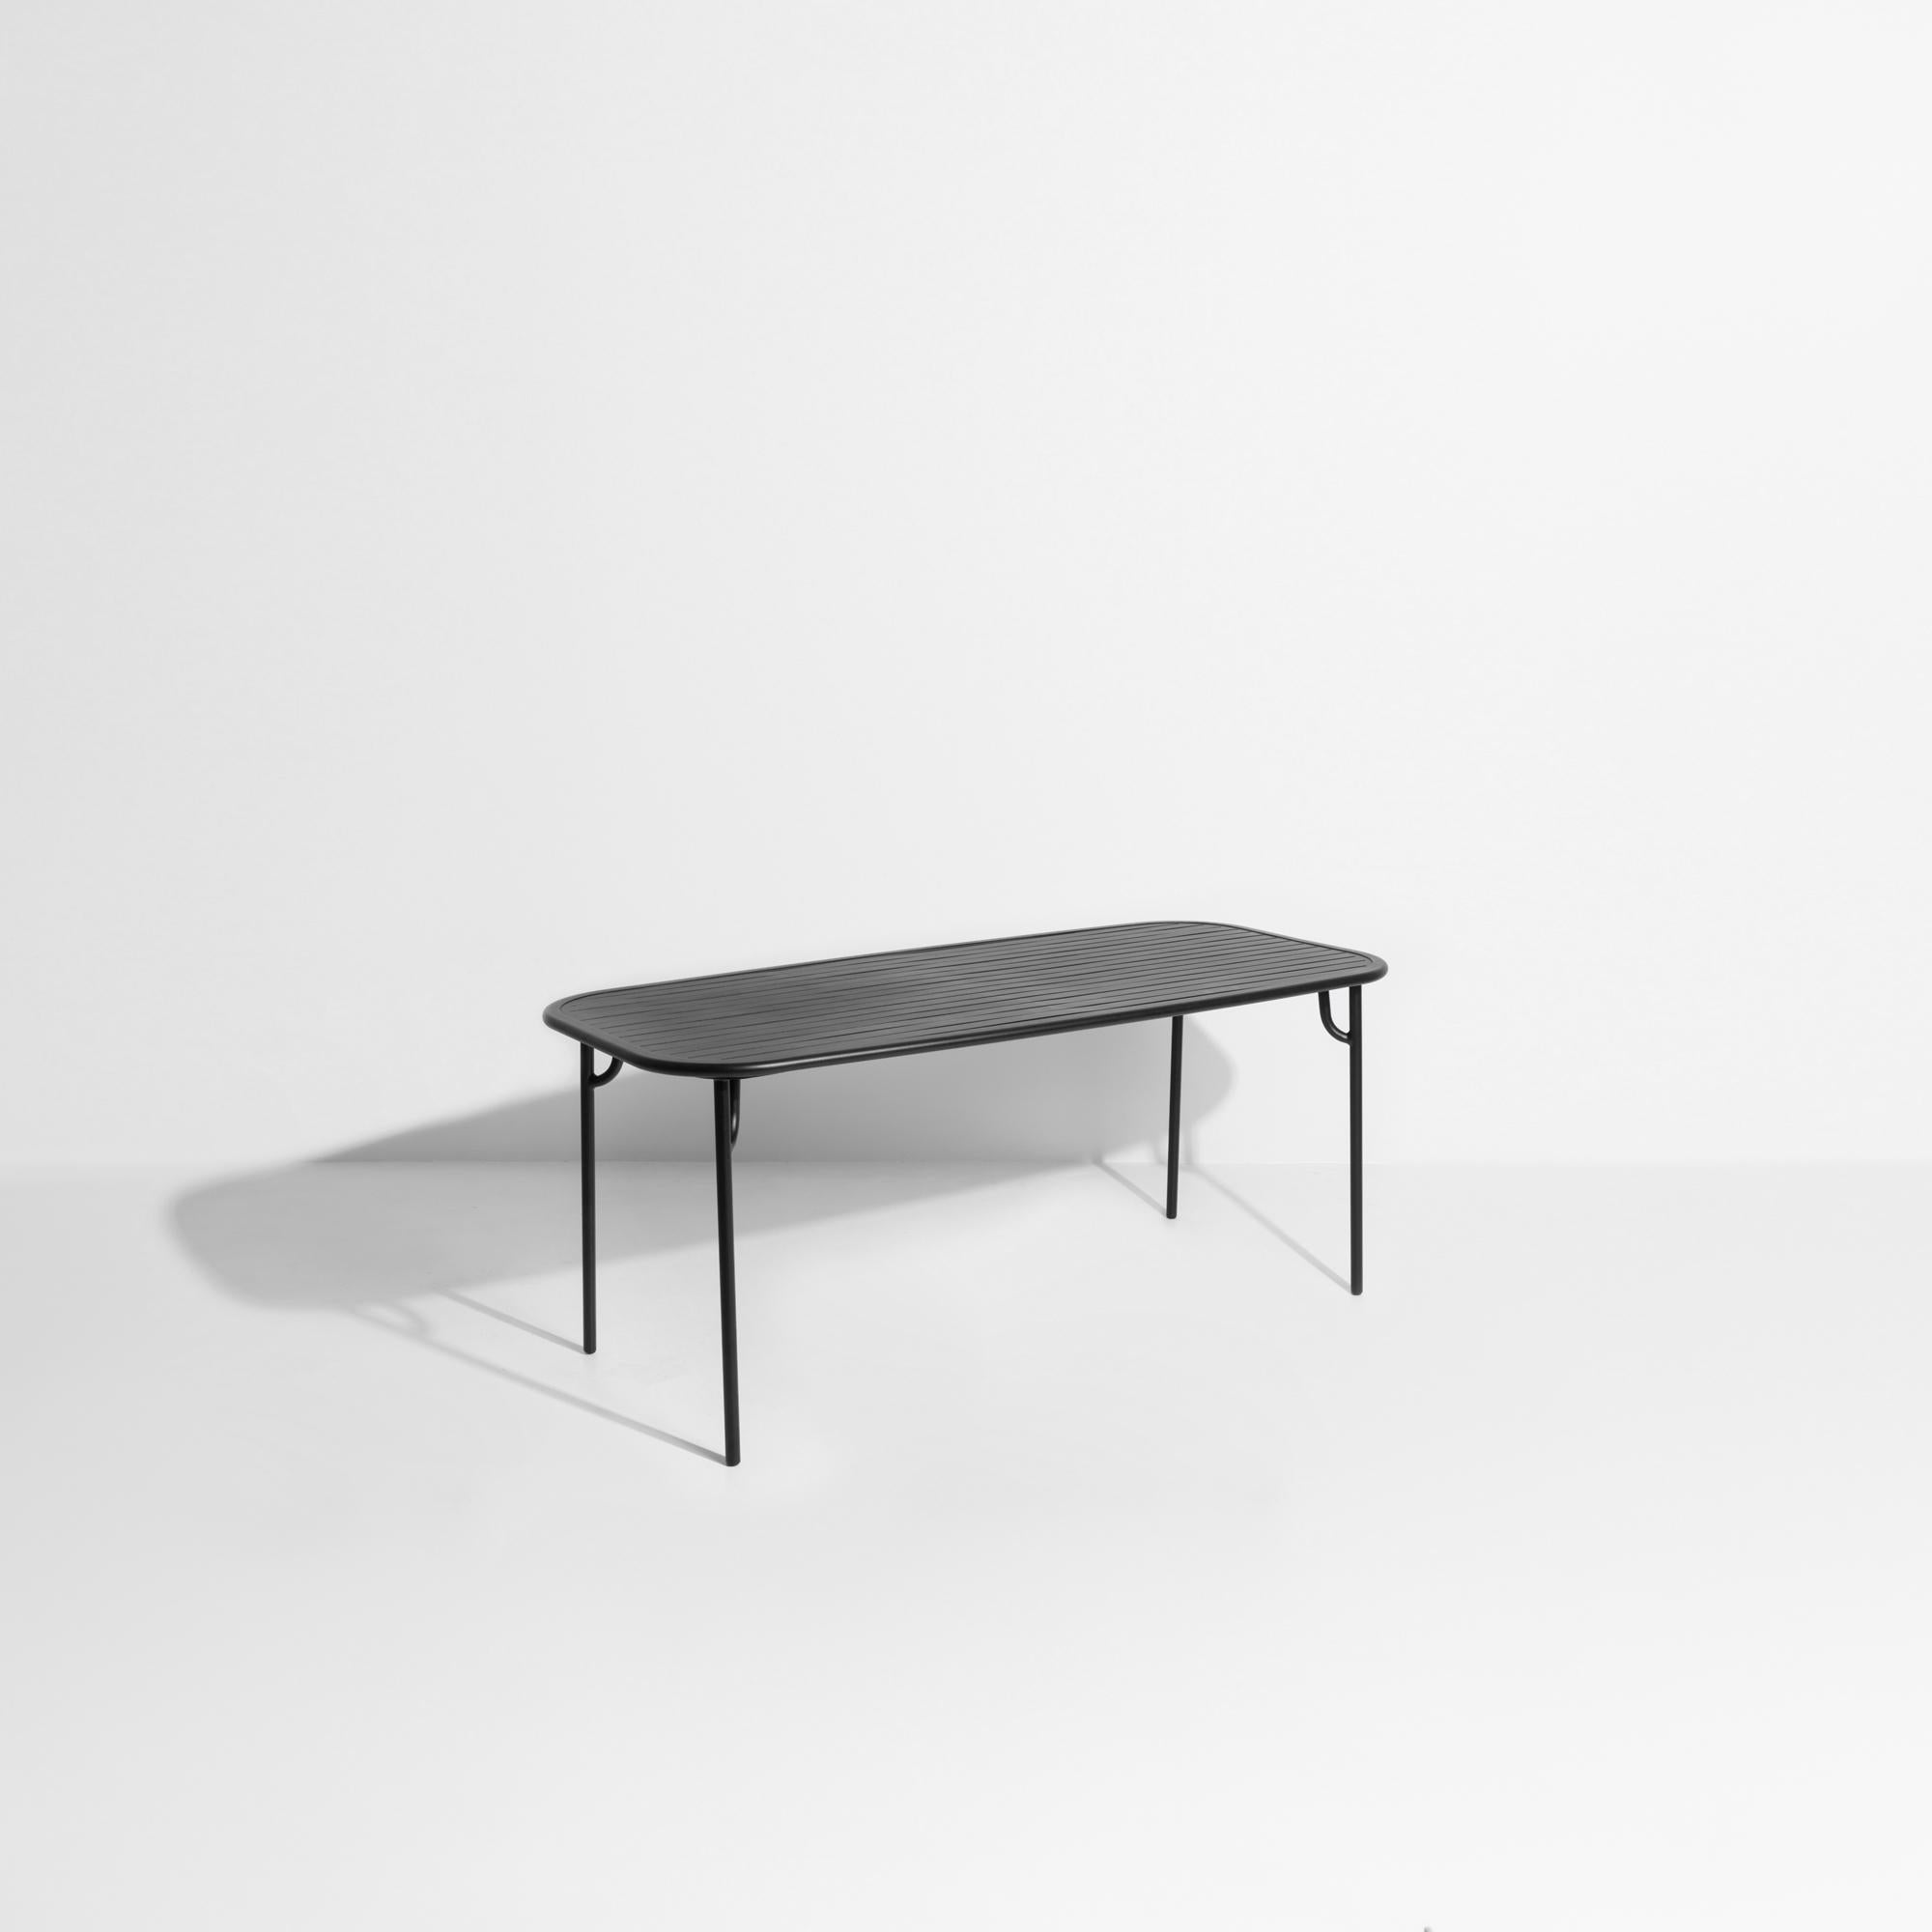 Petite Friture Week-End Medium Rectangular Dining Table in Black with Slats In New Condition For Sale In Brooklyn, NY